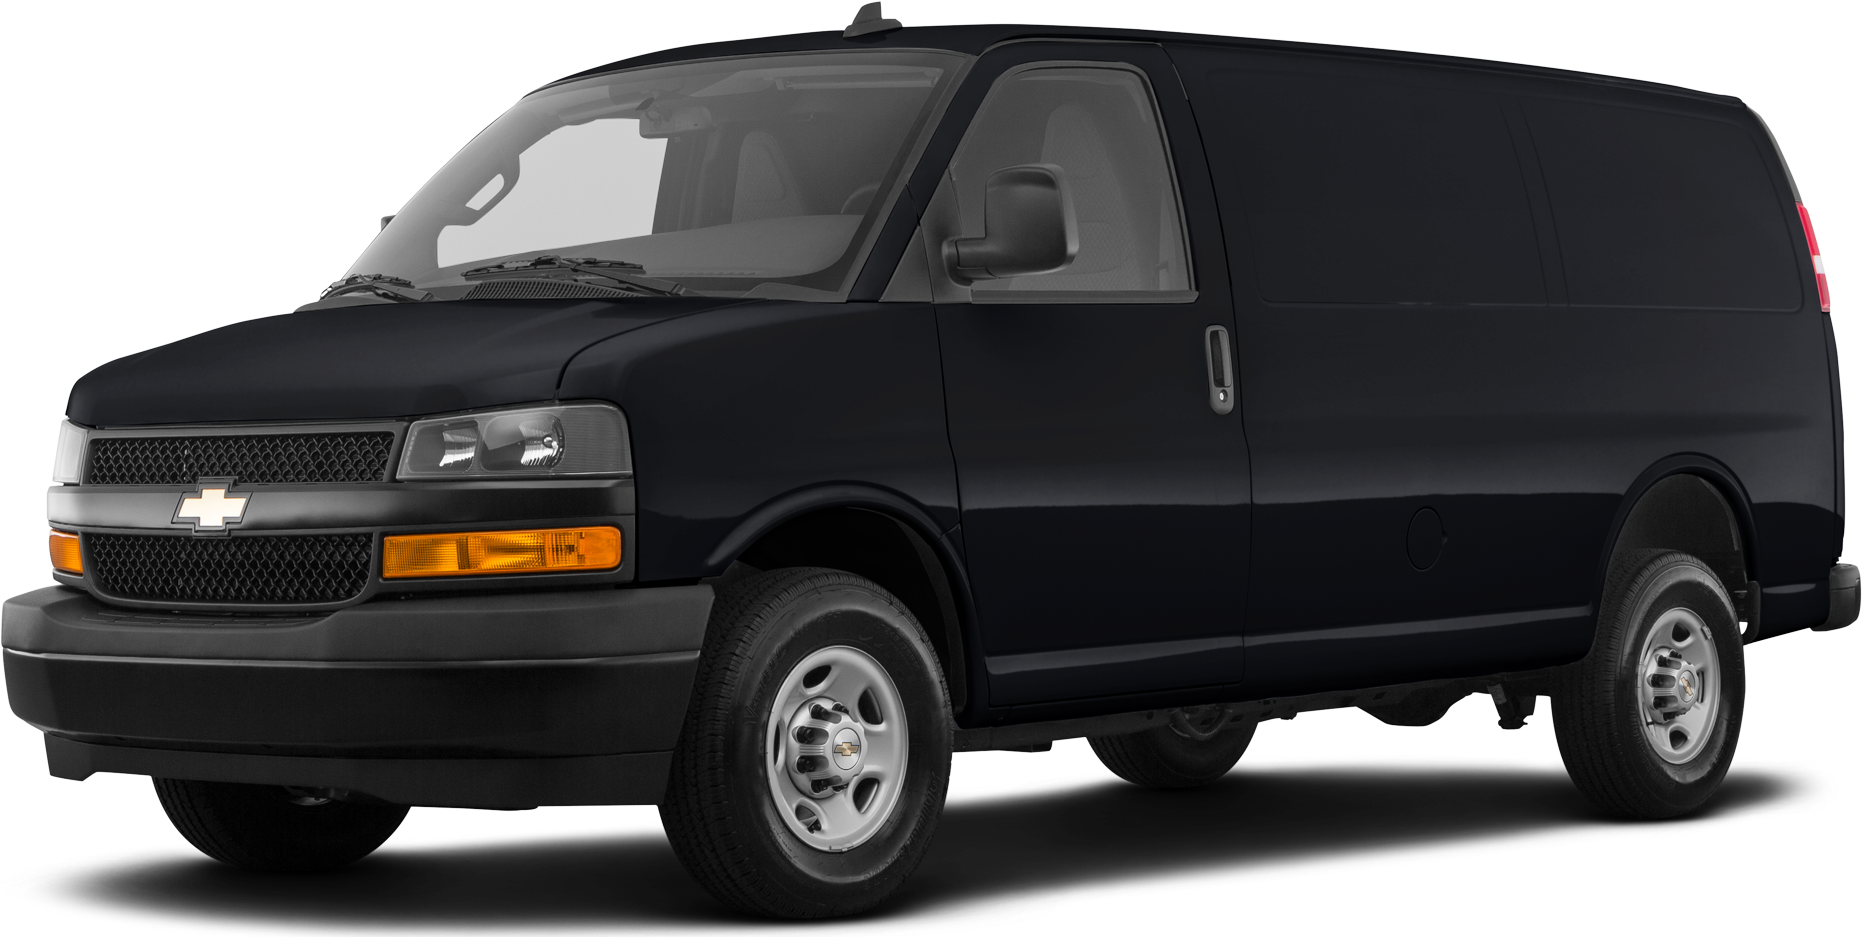 https://file.kelleybluebookimages.com/kbb/base/evox/CP/53208/2024-Chevrolet-Express%203500%20Cargo-front_53208_032_1862x937_GBA_cropped.png